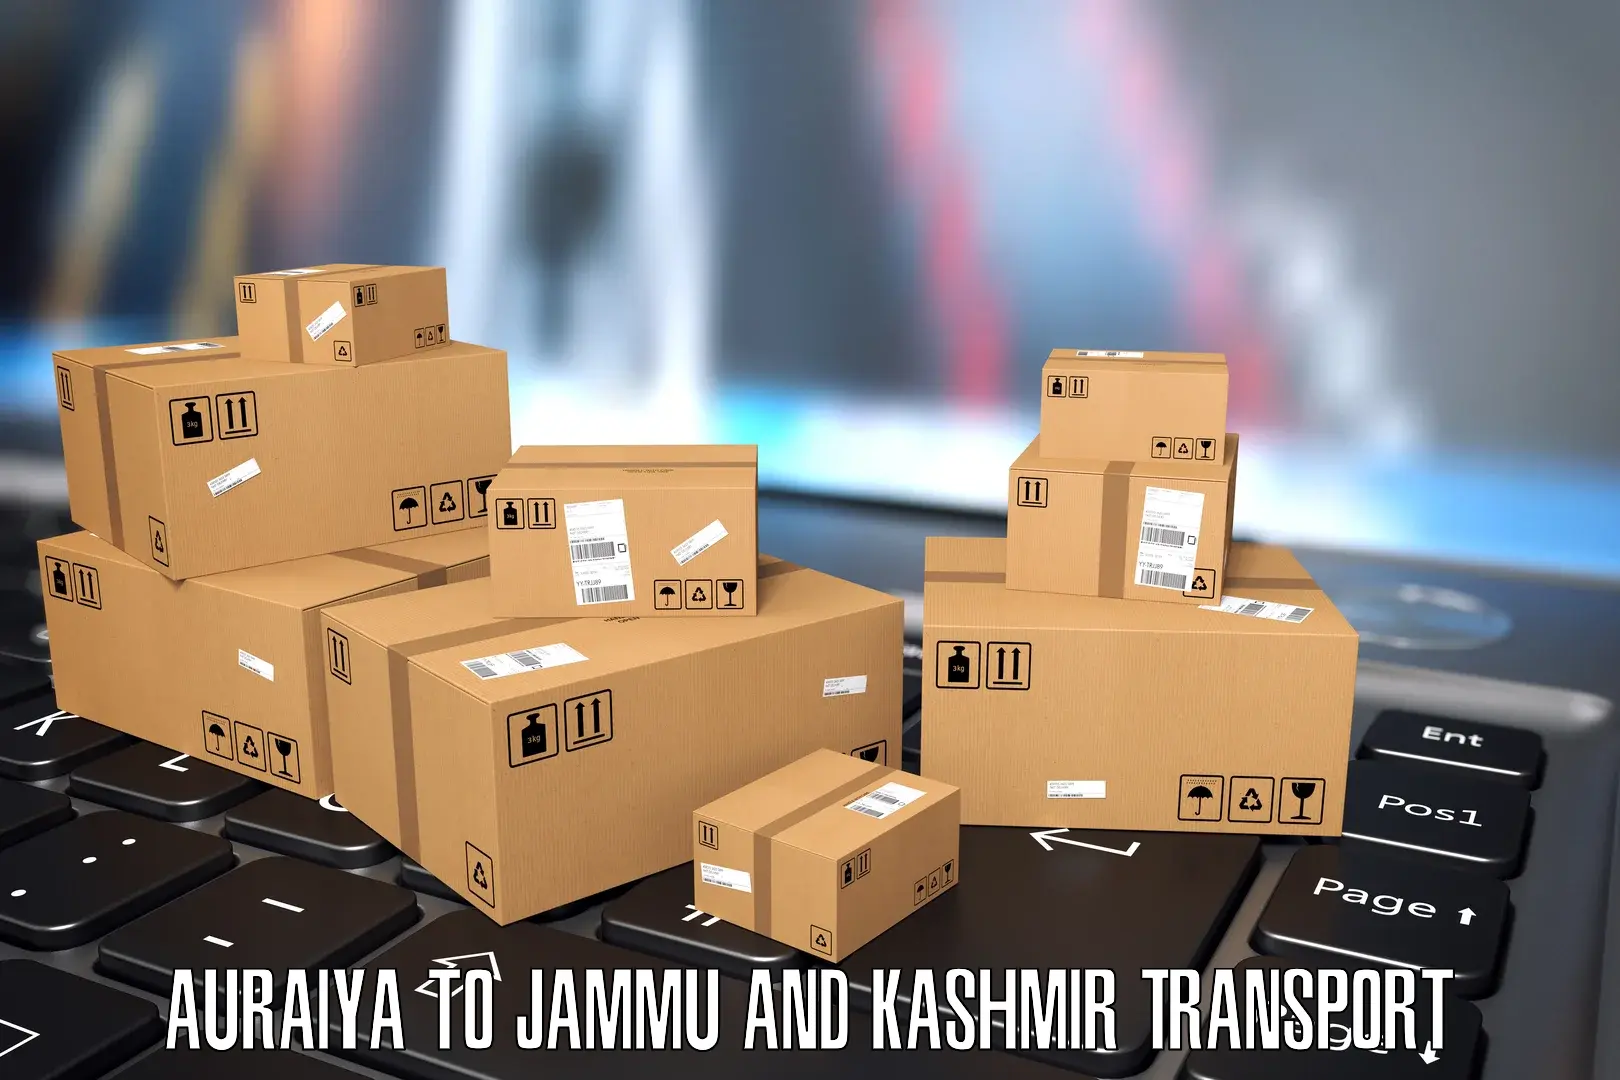 Daily parcel service transport in Auraiya to Leh